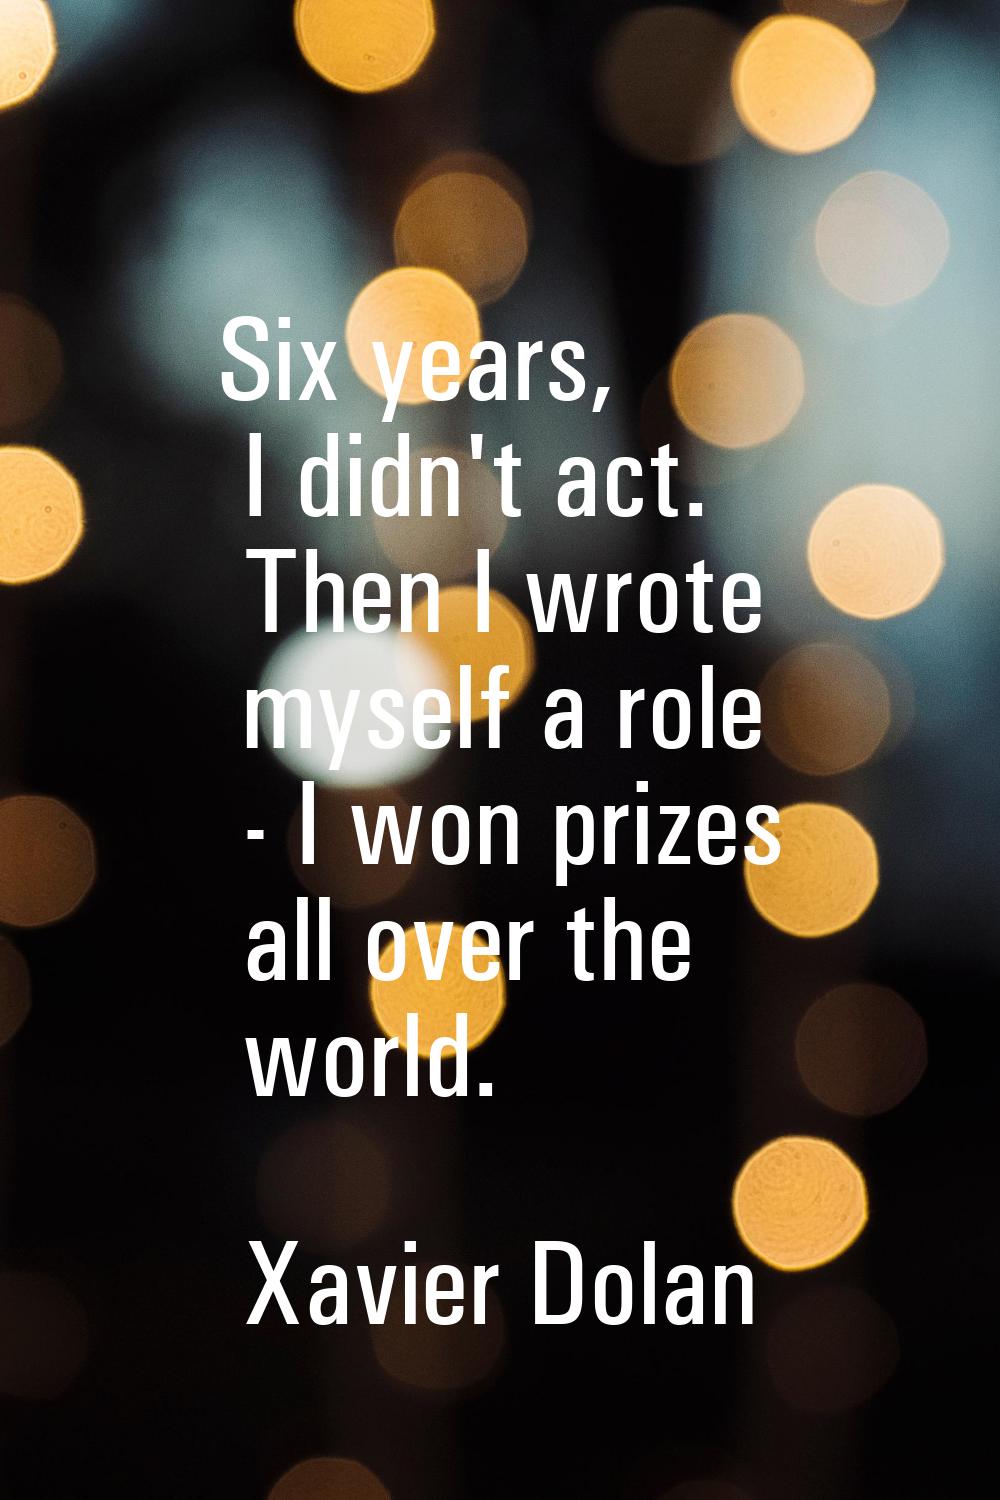 Six years, I didn't act. Then I wrote myself a role - I won prizes all over the world.